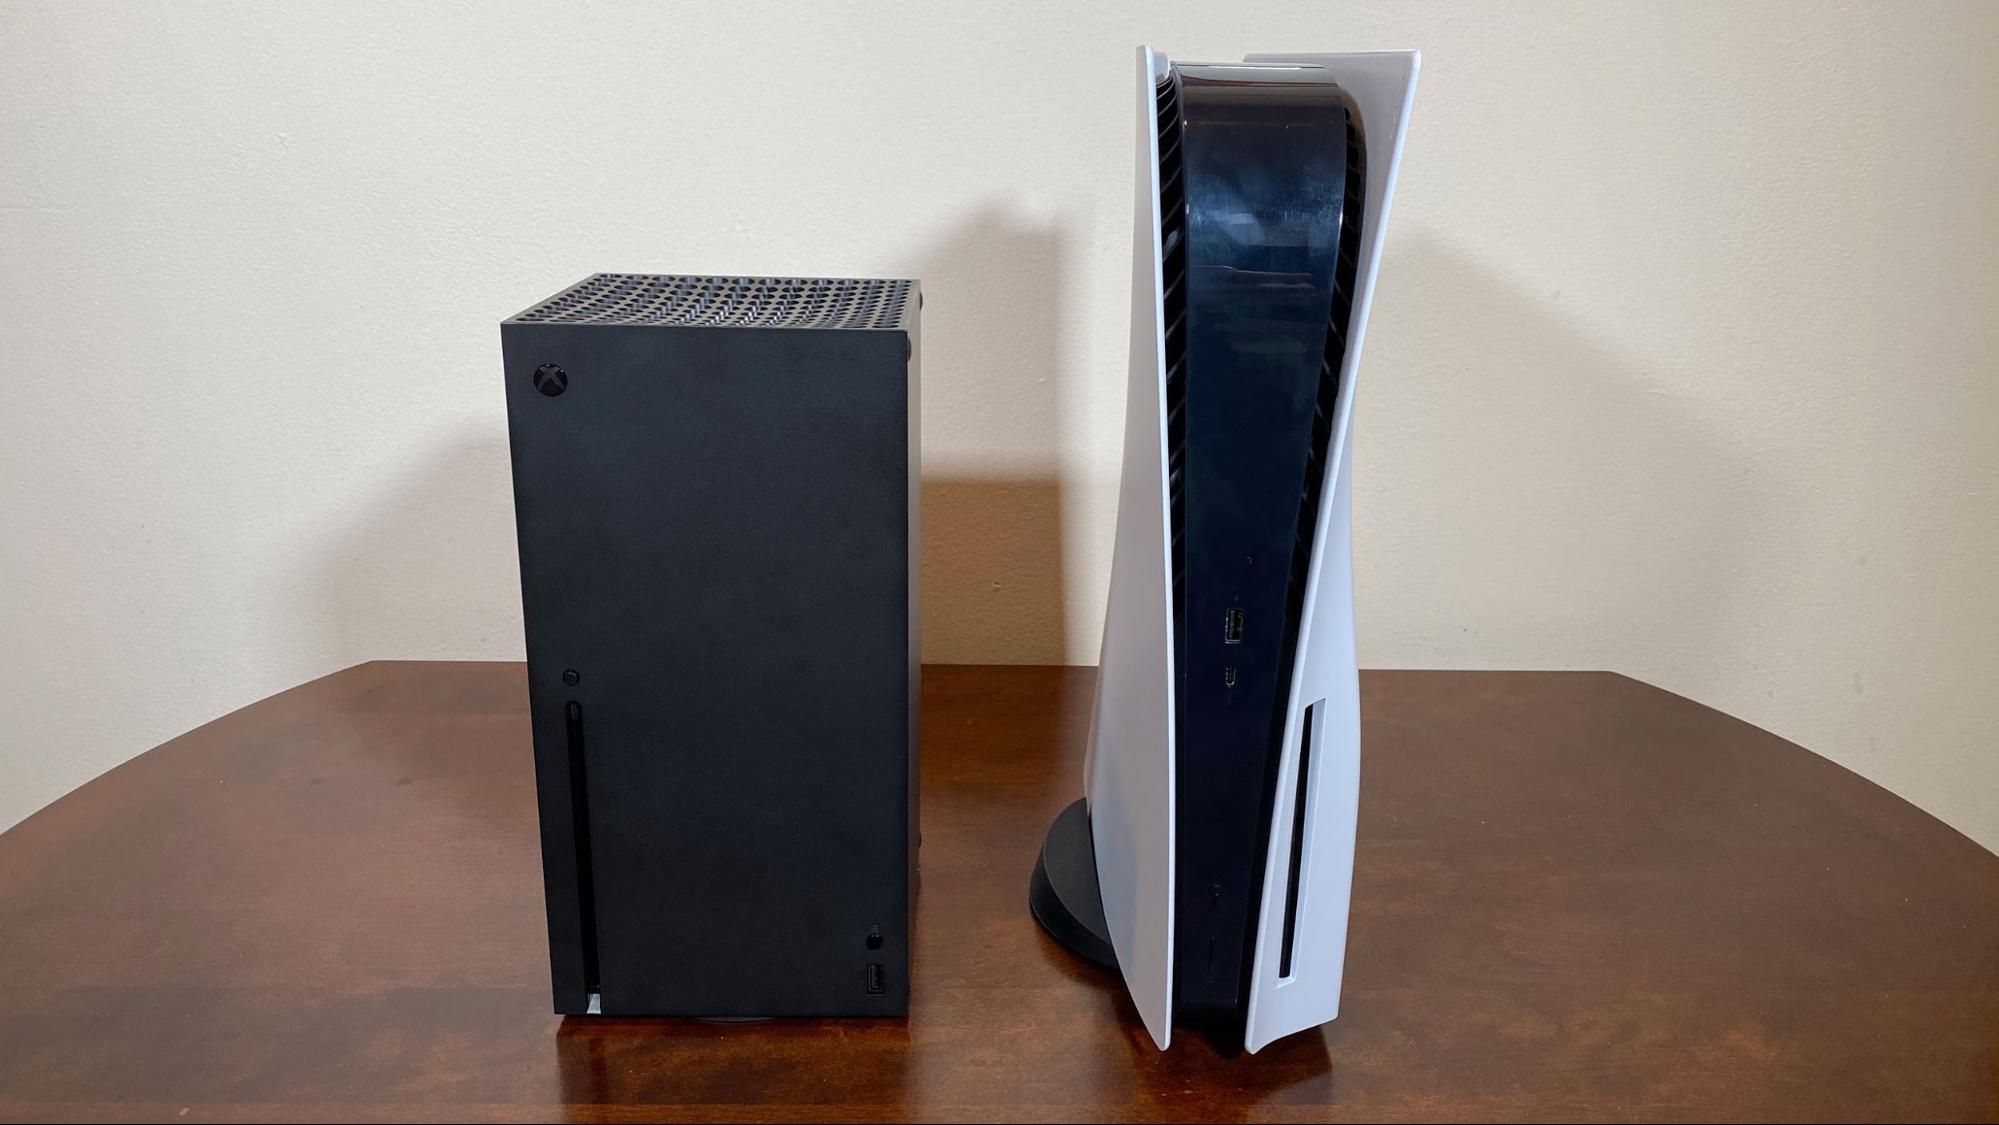 Xbox Series X and PlayStation 5